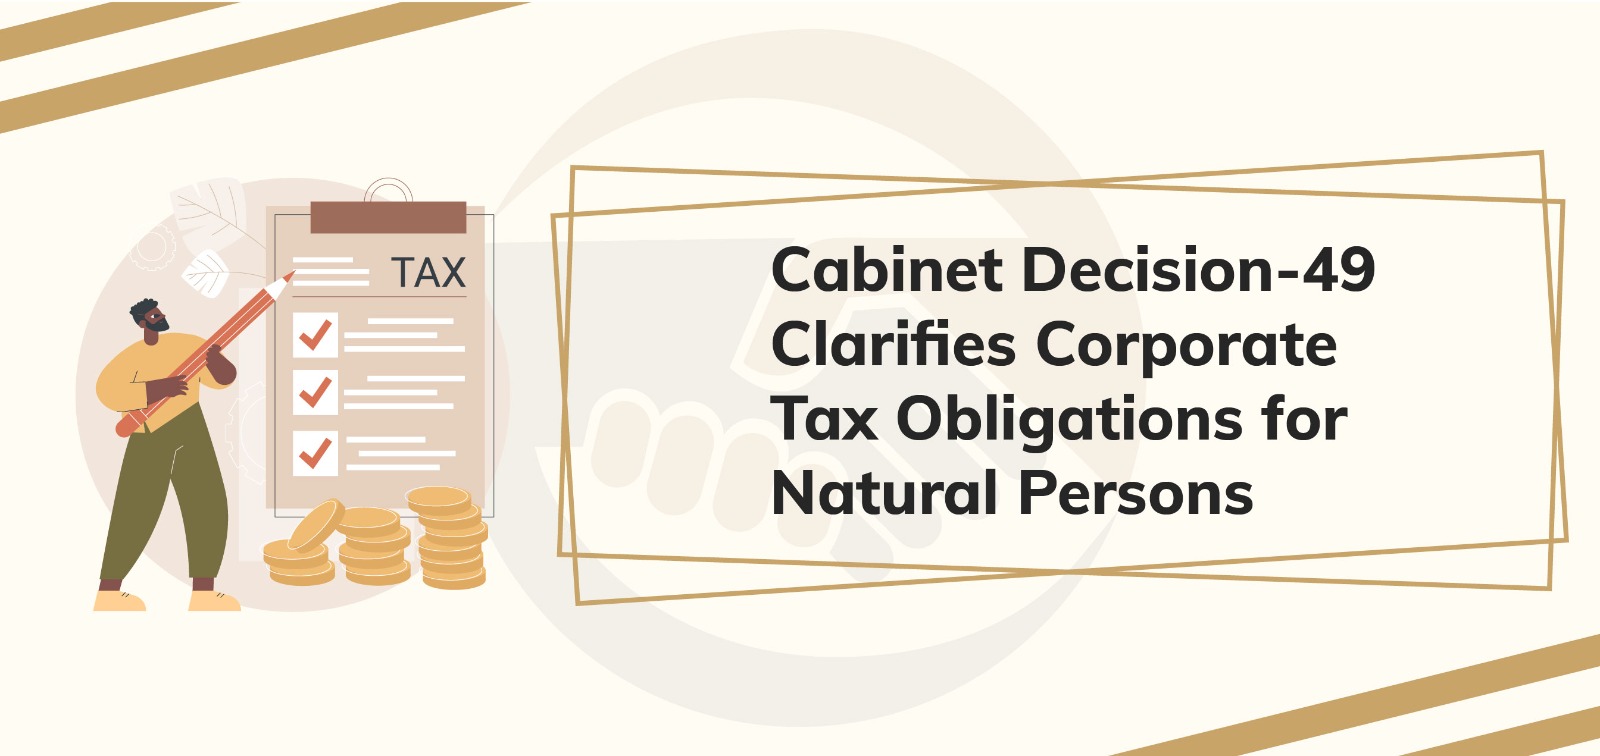 Cabinet Decision Clarifies Corporate Tax Obligations for Natural Persons